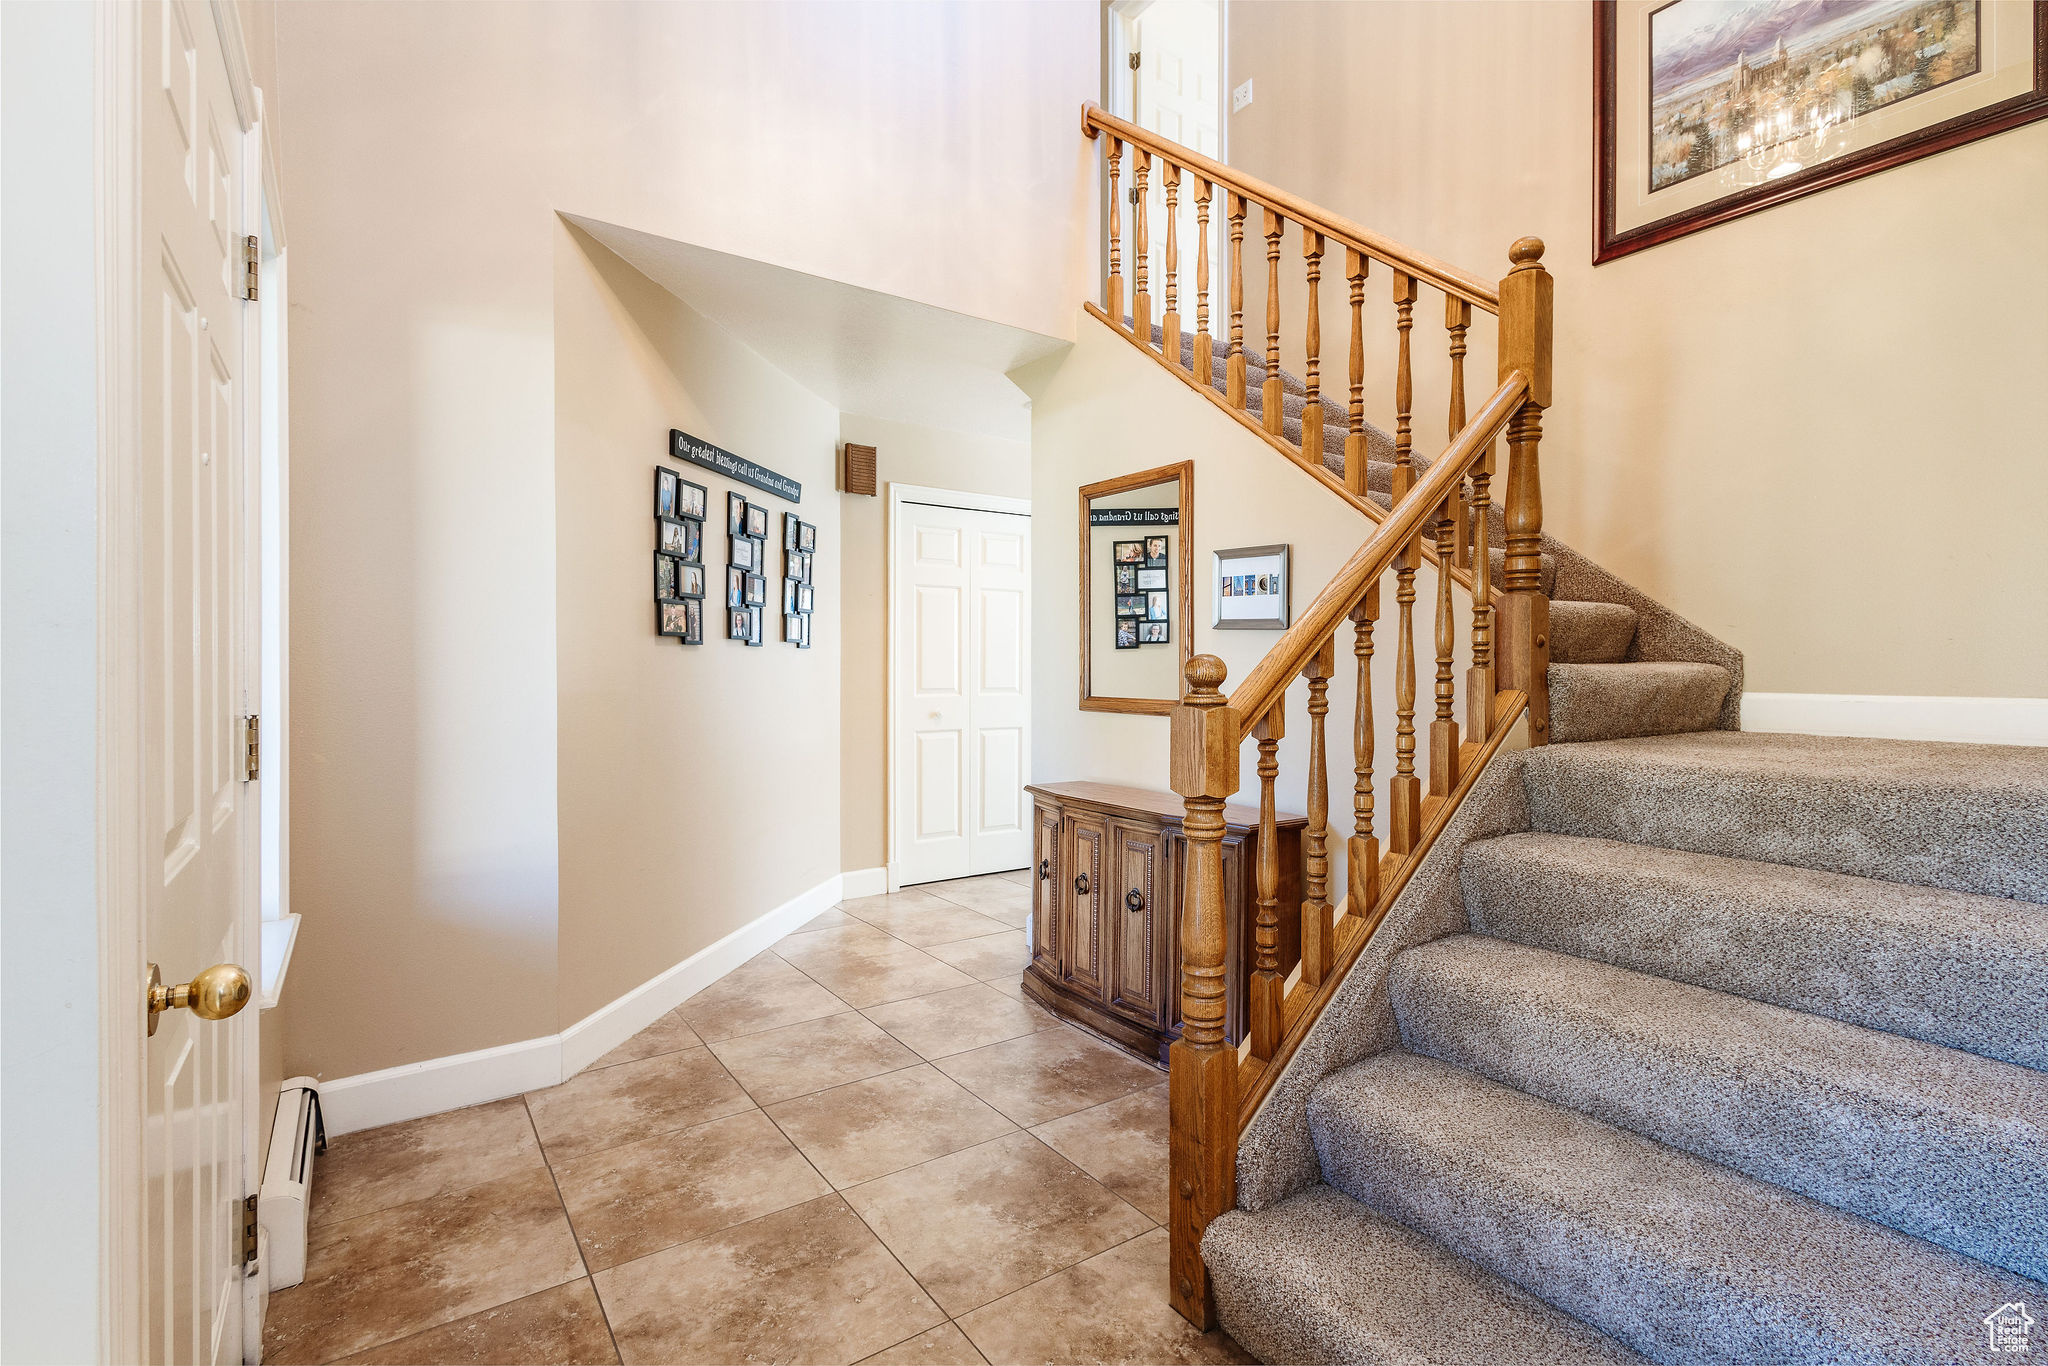 Tiled foyer with a high ceiling and baseboard heating